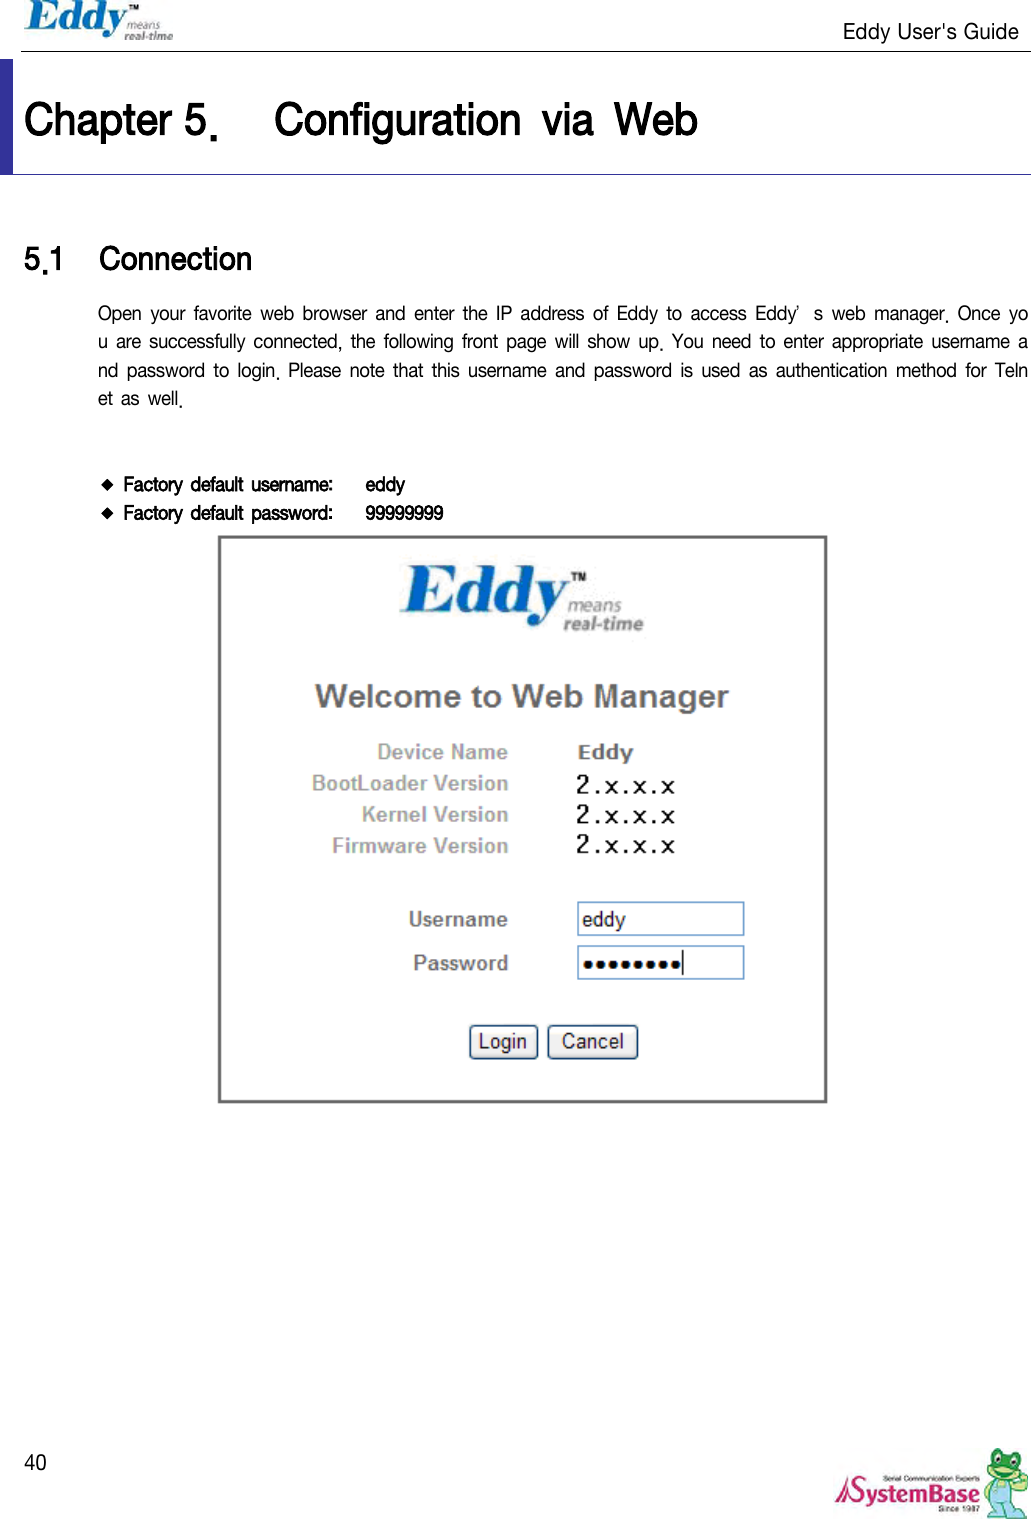                                                                   Eddy User&apos;s Guide   40 Chapter 5. Configuration  via  Web 5.1 Connection Open your  favorite  web  browser  and enter  the IP  address  of  Eddy  to access  Eddy’s  web  manager.  Once  you are successfully connected, the  following front page  will show up.  You need  to enter appropriate  username  and password  to  login.  Please  note that this username  and password is  used as  authentication method  for Telnet as well.    ◆ Factory default username:   eddy ◆ Factory default password:   99999999   